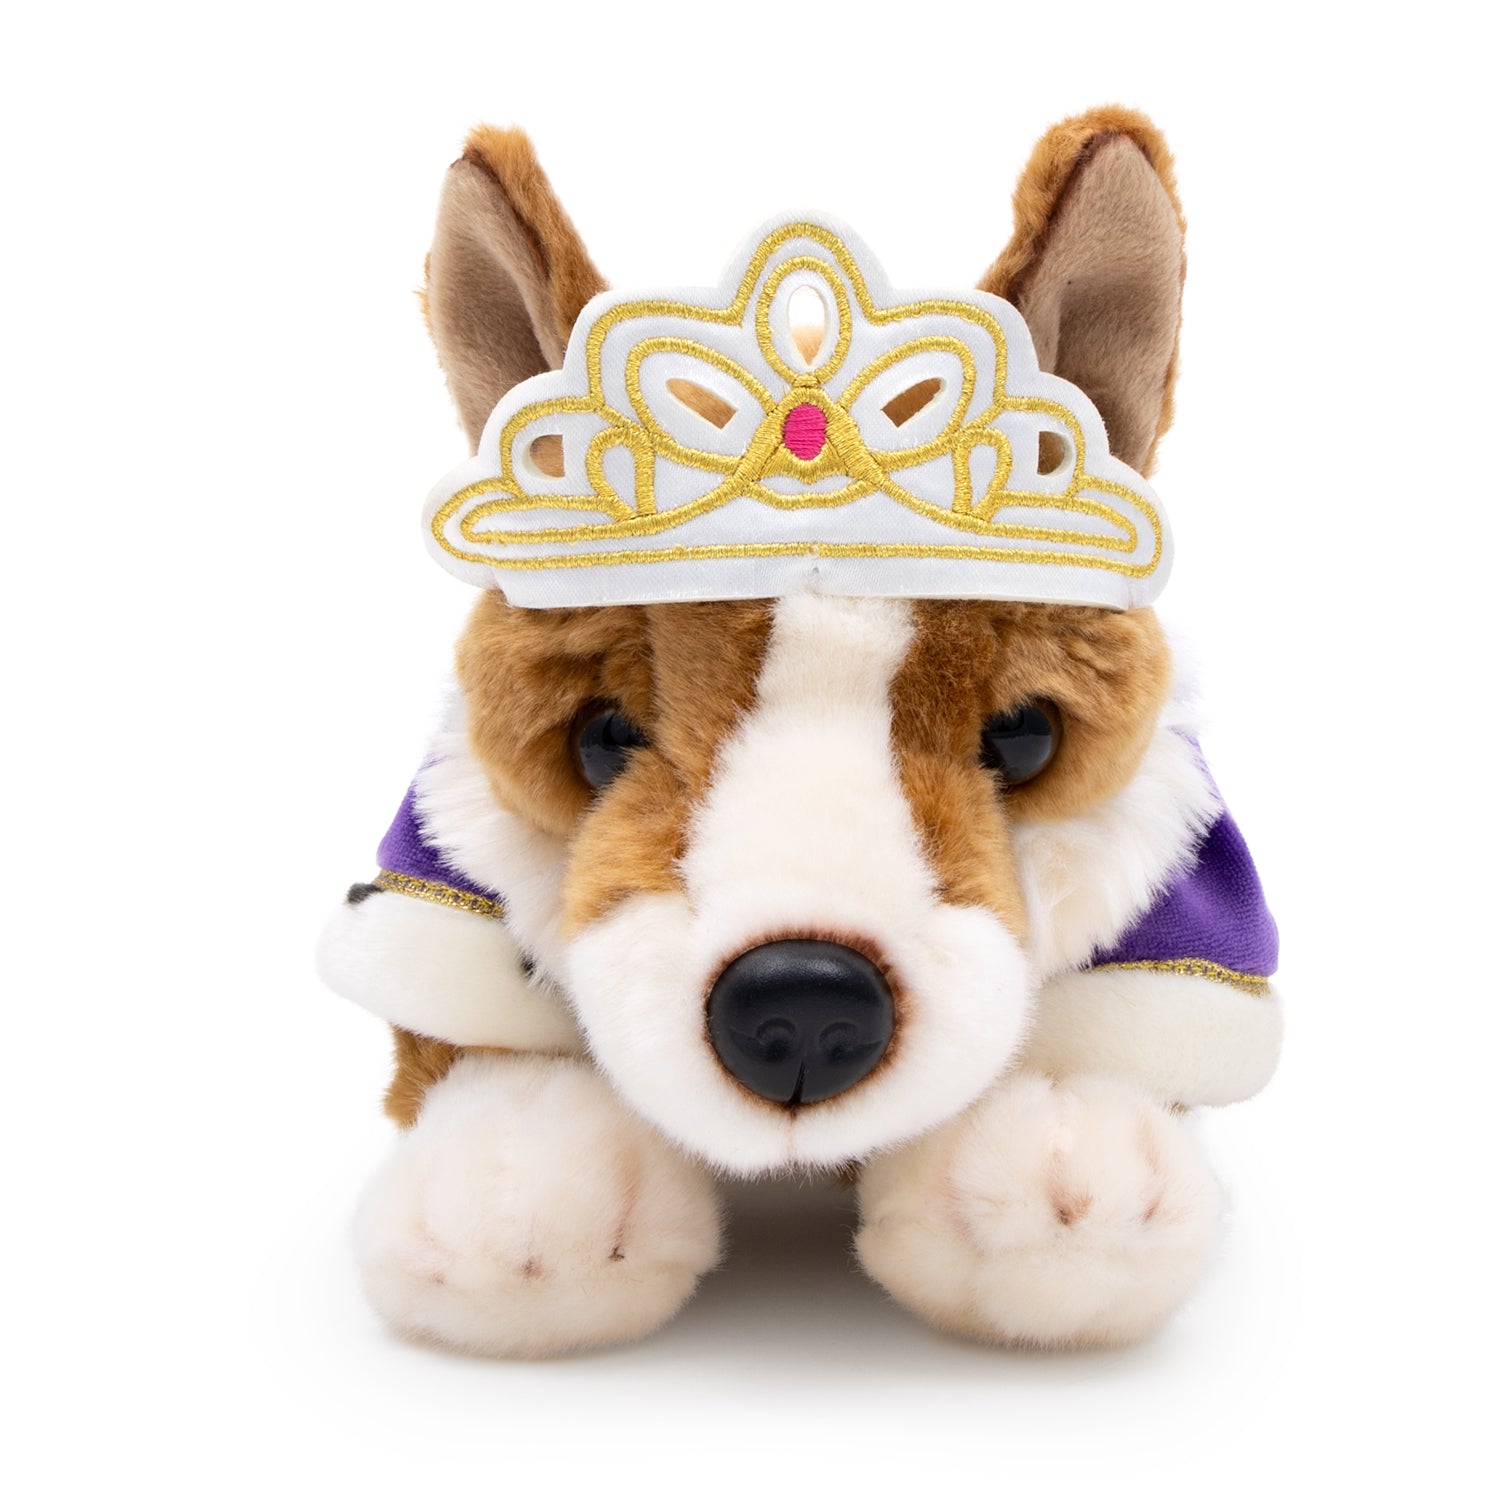 Royal Corgi Dog Soft Toy with Cape and Crown 3